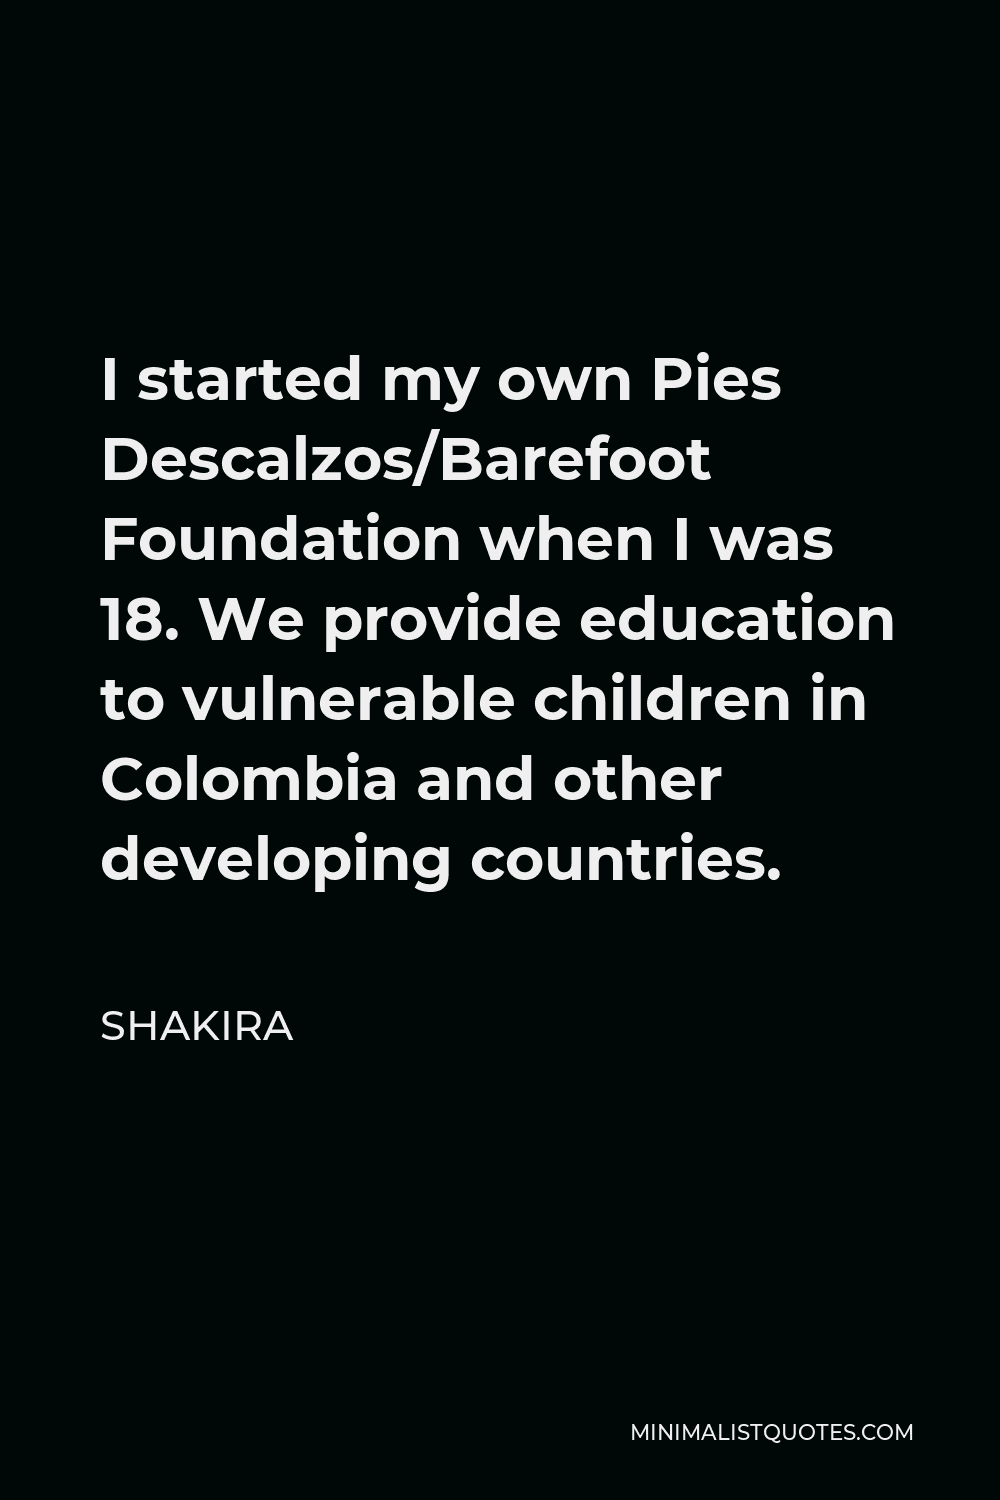 Shakira Quote - I started my own Pies Descalzos/Barefoot Foundation when I was 18. We provide education to vulnerable children in Colombia and other developing countries.